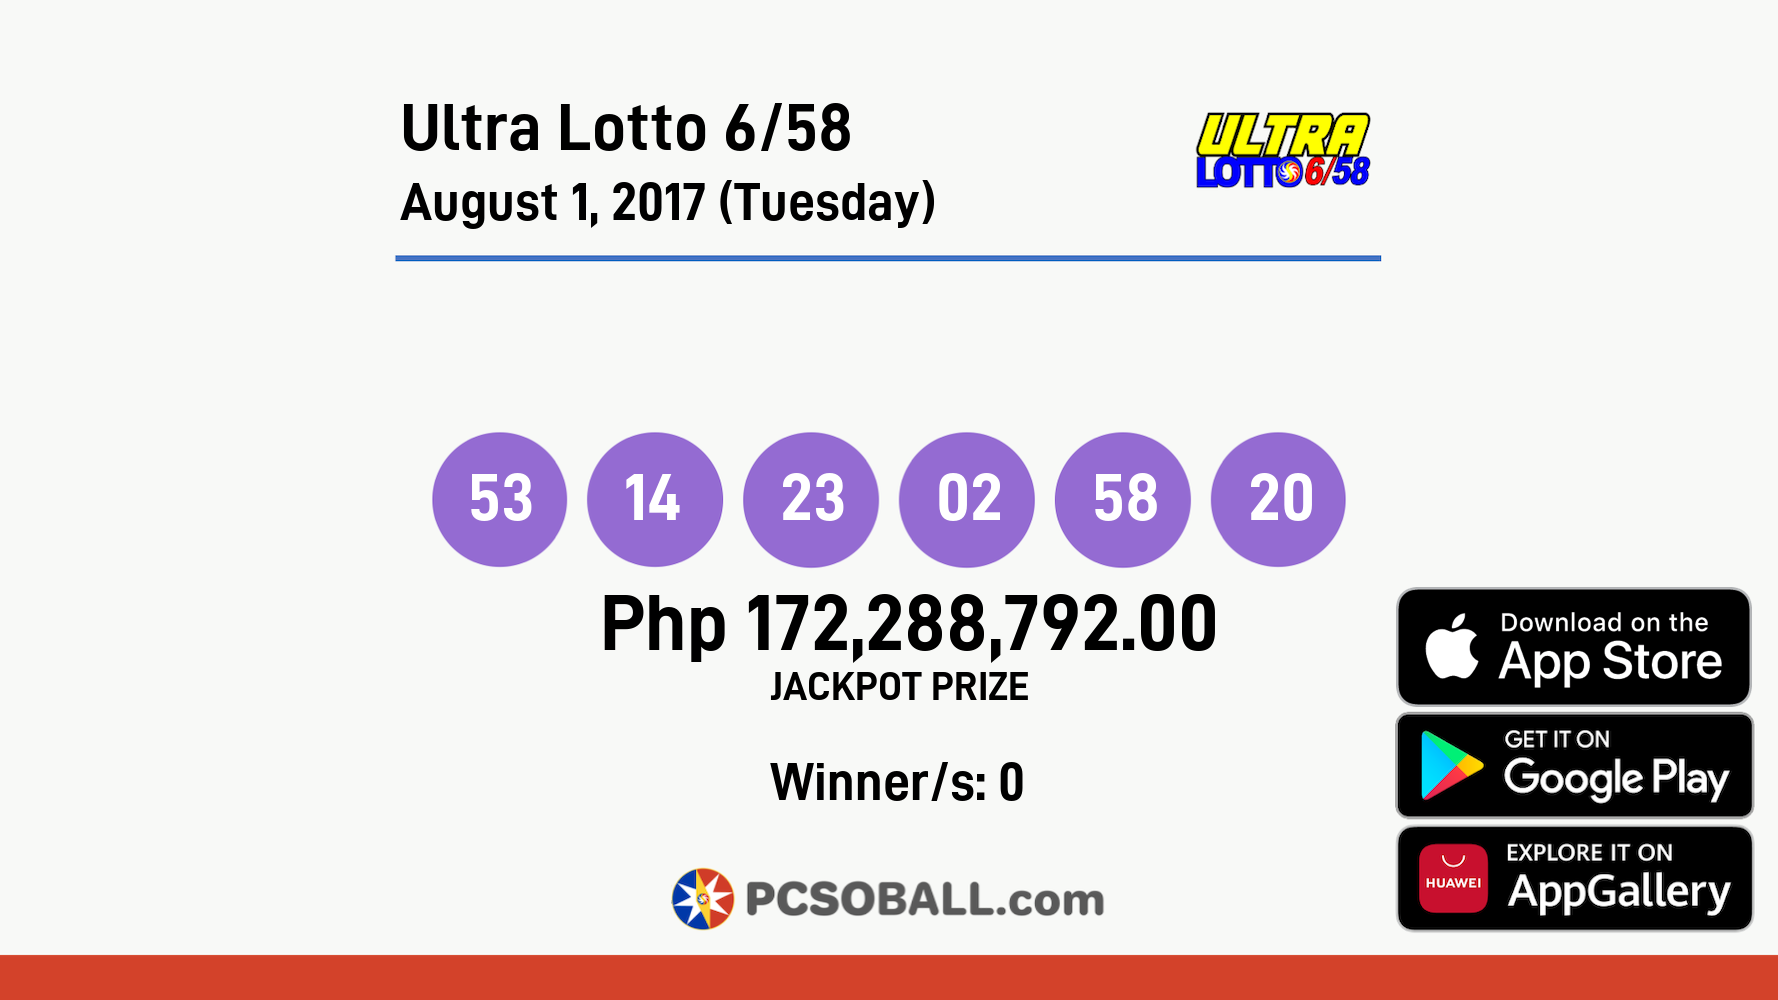 Ultra Lotto 6/58 August 1, 2017 (Tuesday) Result